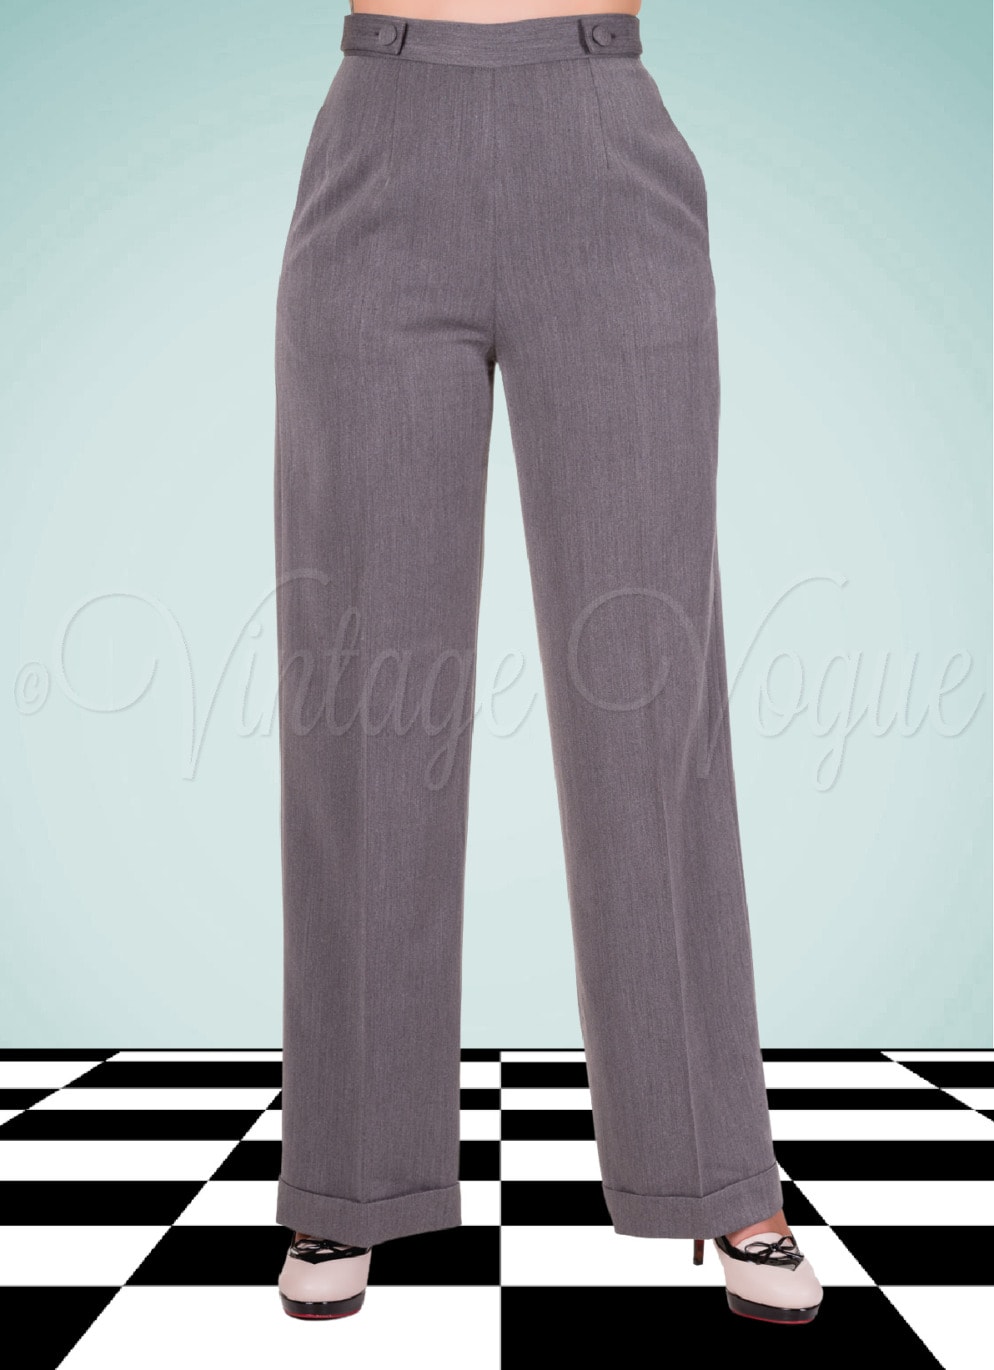 Banned 40er Jahre Retro High Waist Marlene Stoff Hose Party On Trousers in Grau Meliert